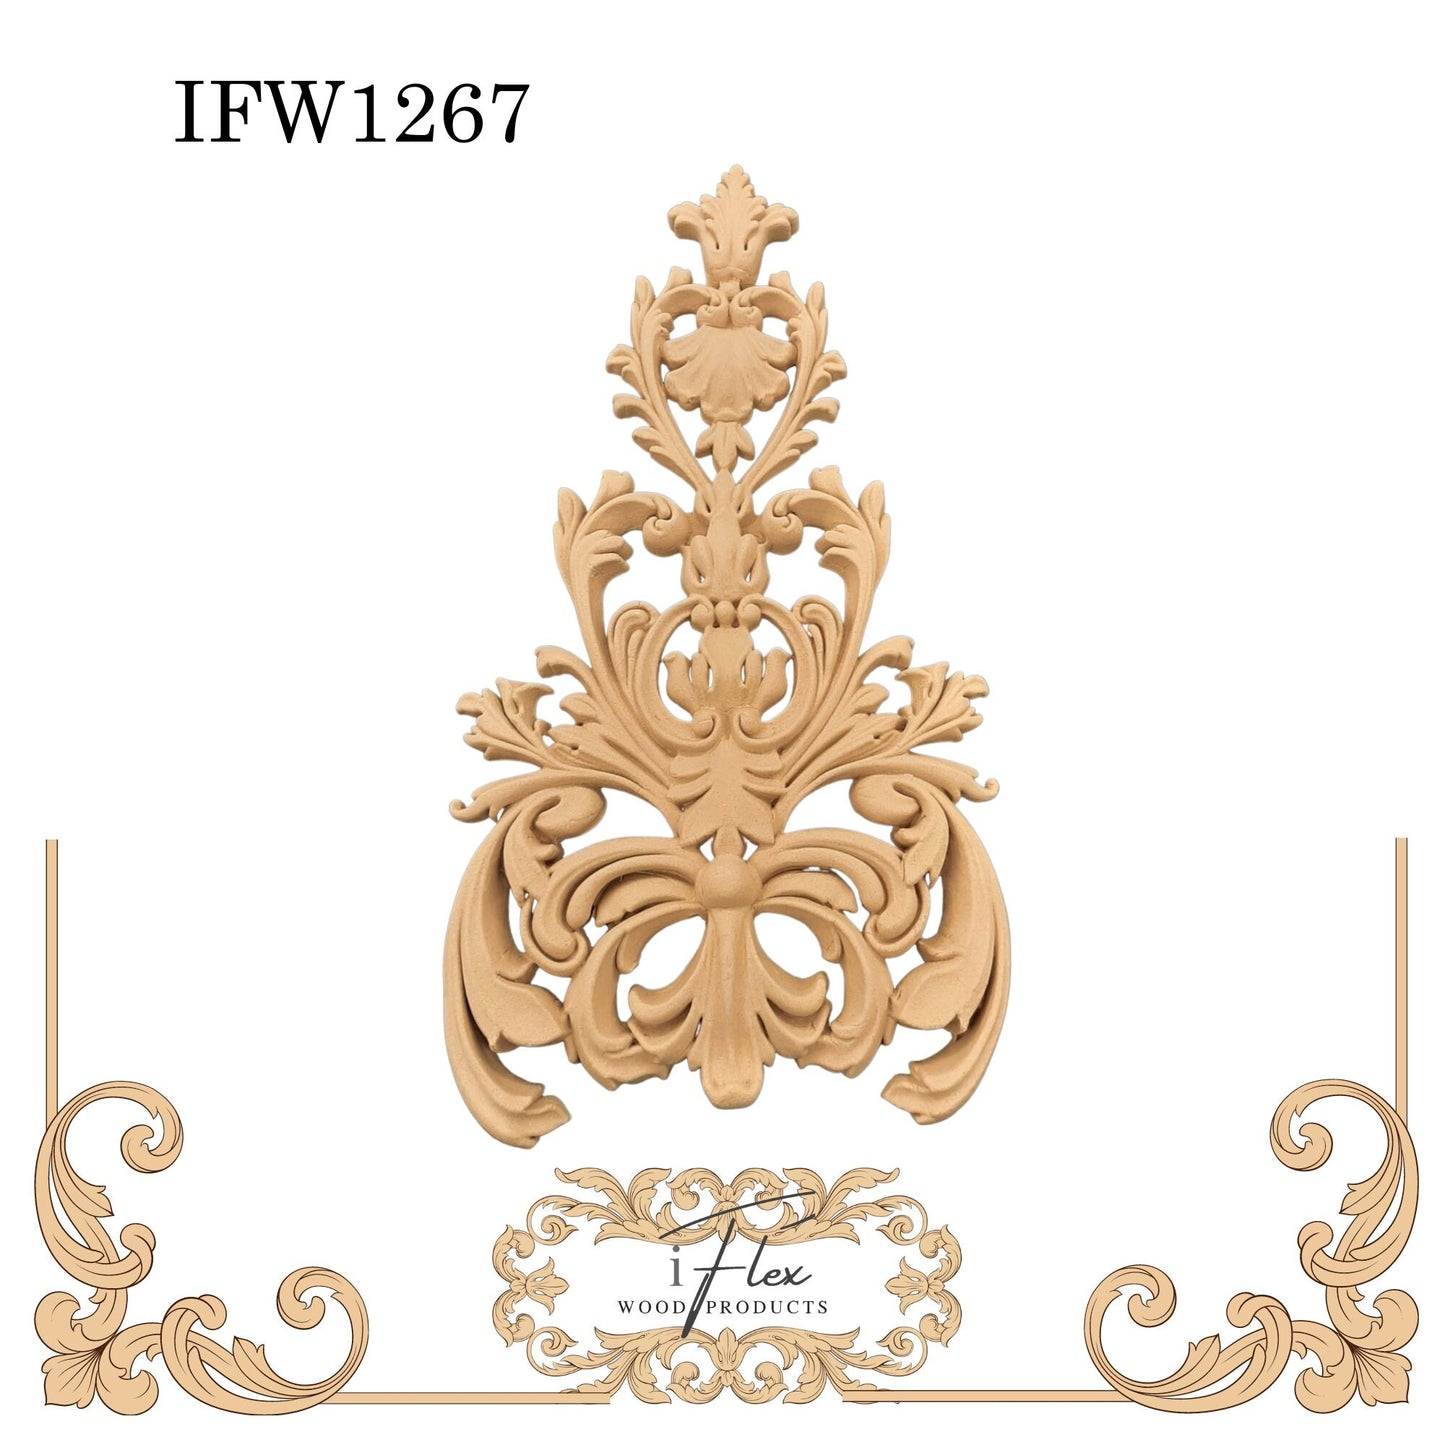 IFW 1267 iFlex Wood Products, bendable mouldings, flexible, wooden appliques, drop, architectural piece